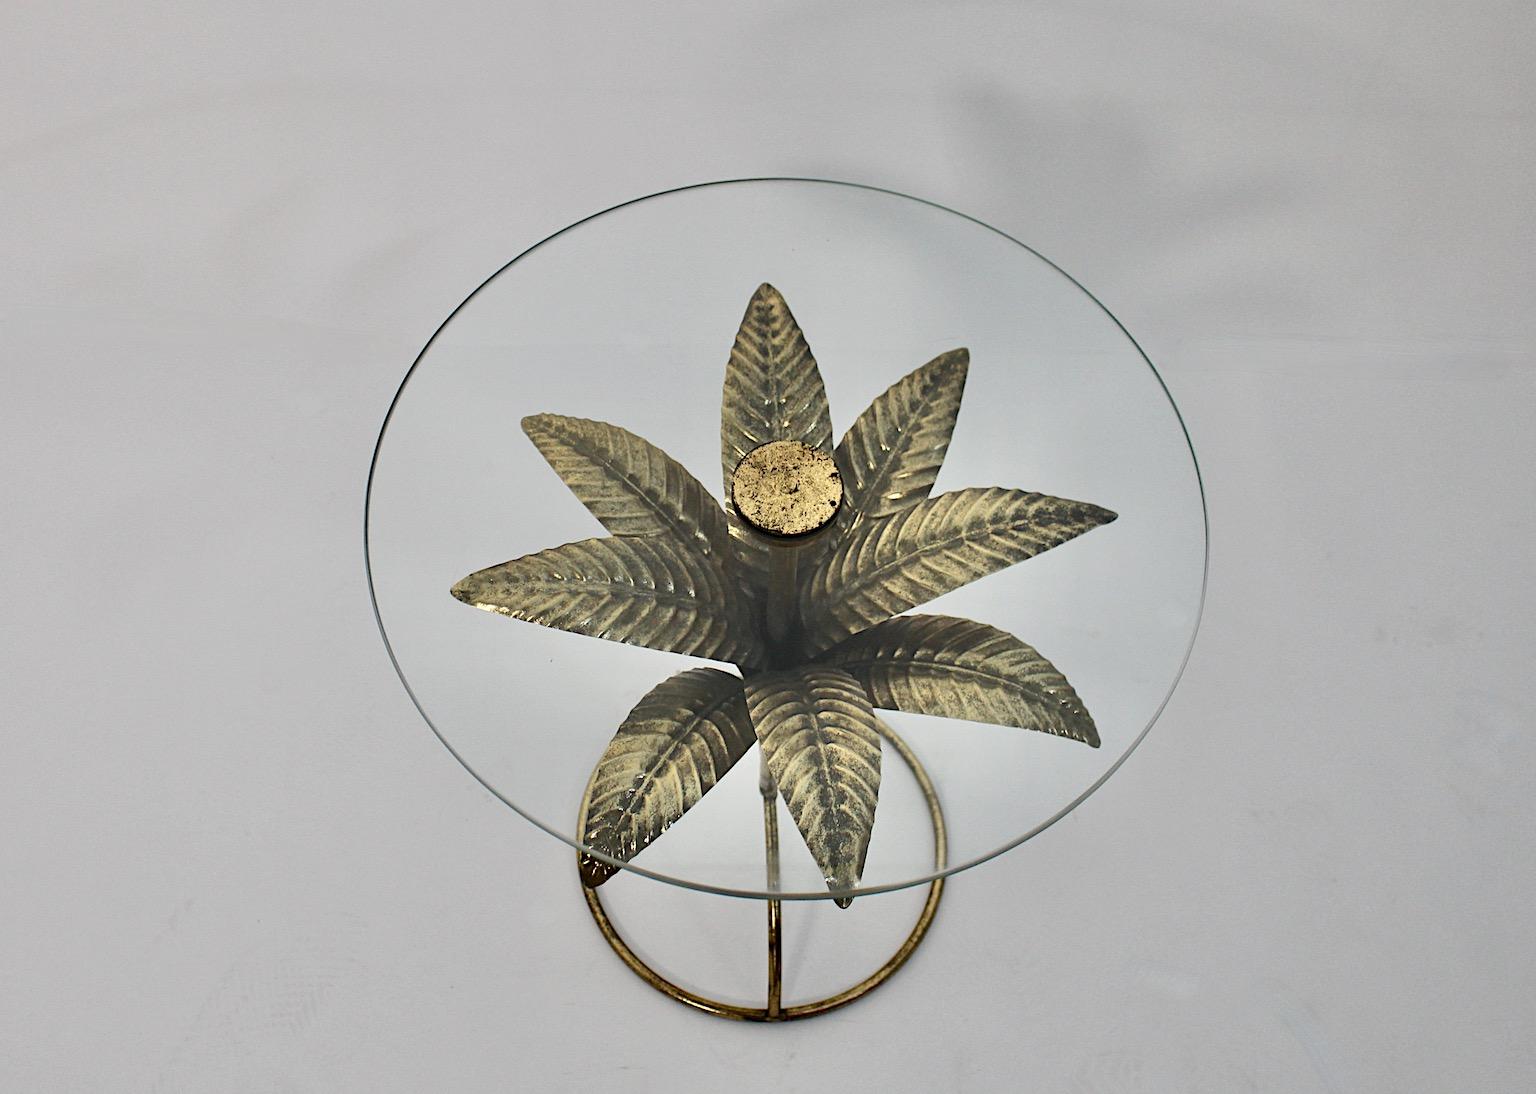 Hollywood Regency Style vintage circular like coffee table or side table from clear glass and golden metal base with golden leaves.
A stunning side table or coffee table with a circular like base featuring golden leaves or palm tree with a clear